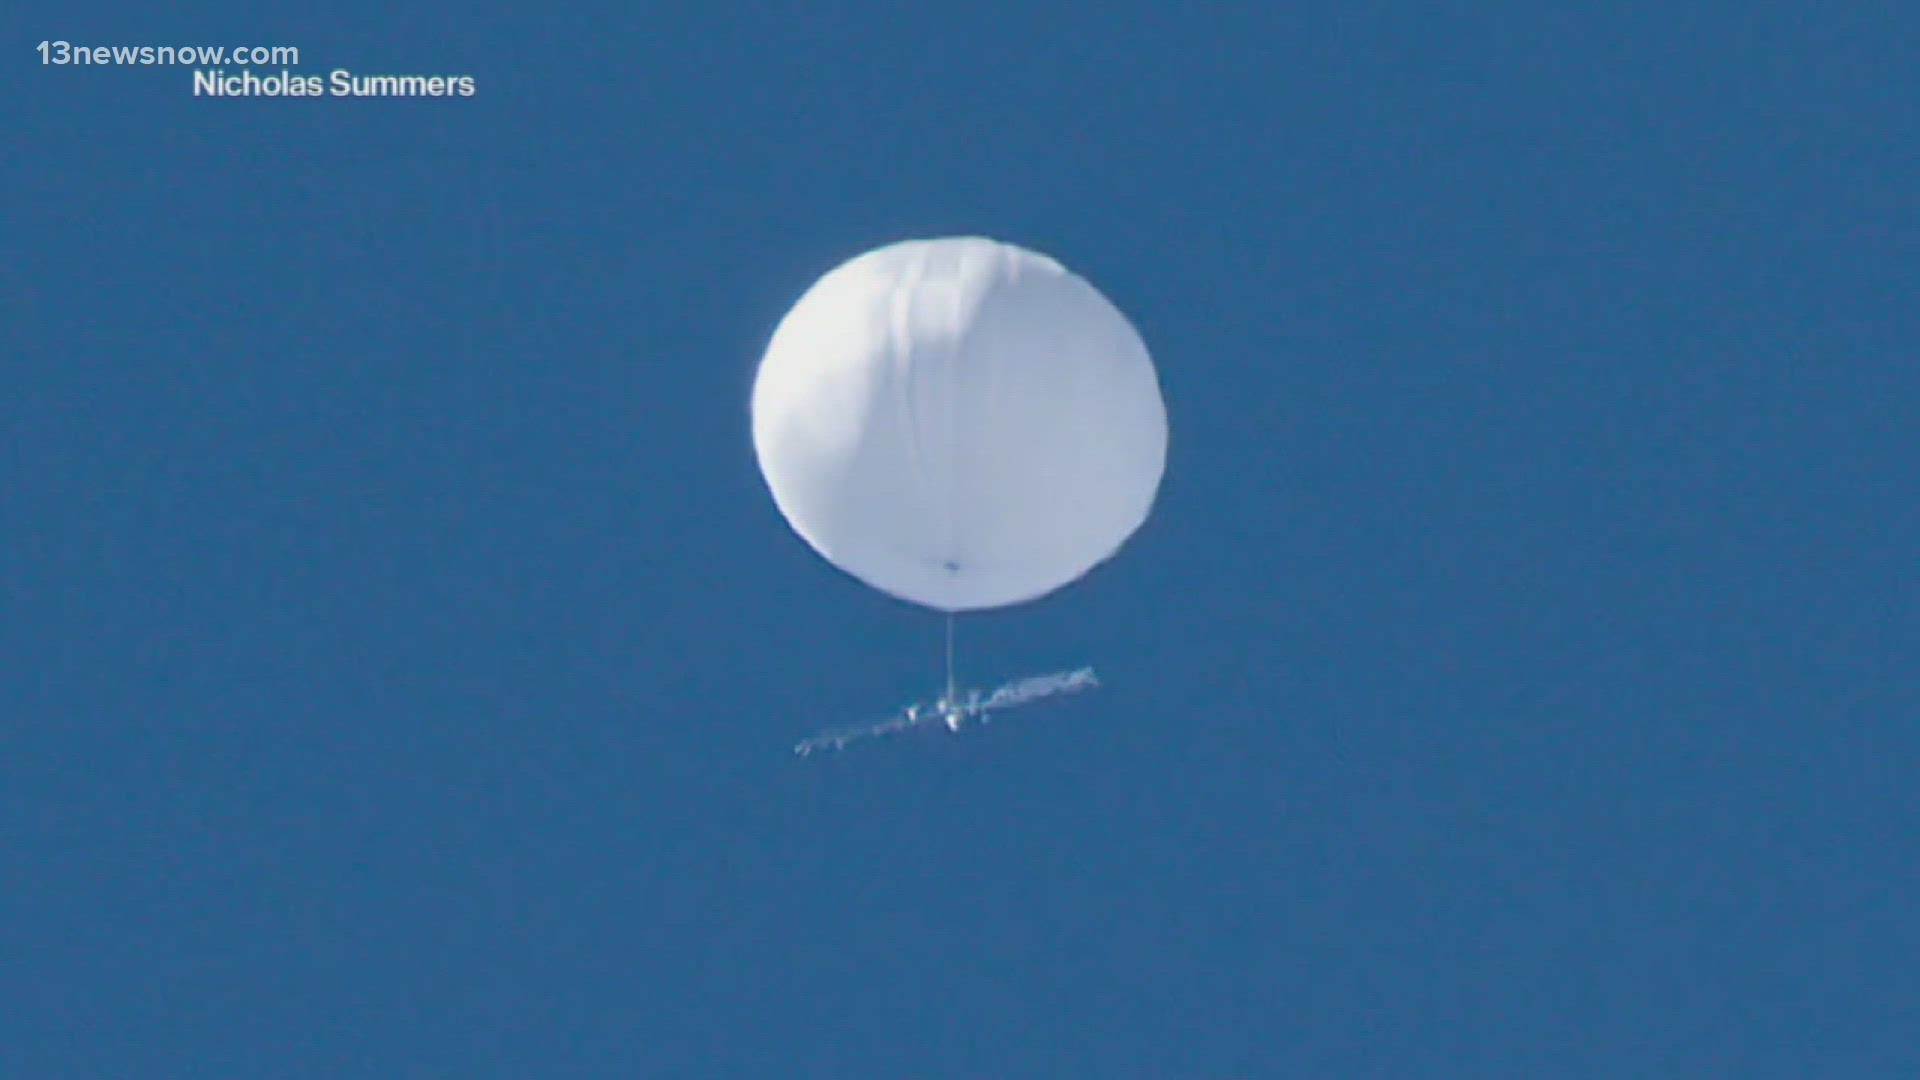 Officials say a fighter jet intercepted the small balloon over Utah — determining it was not maneuverable and did not pose a threat.